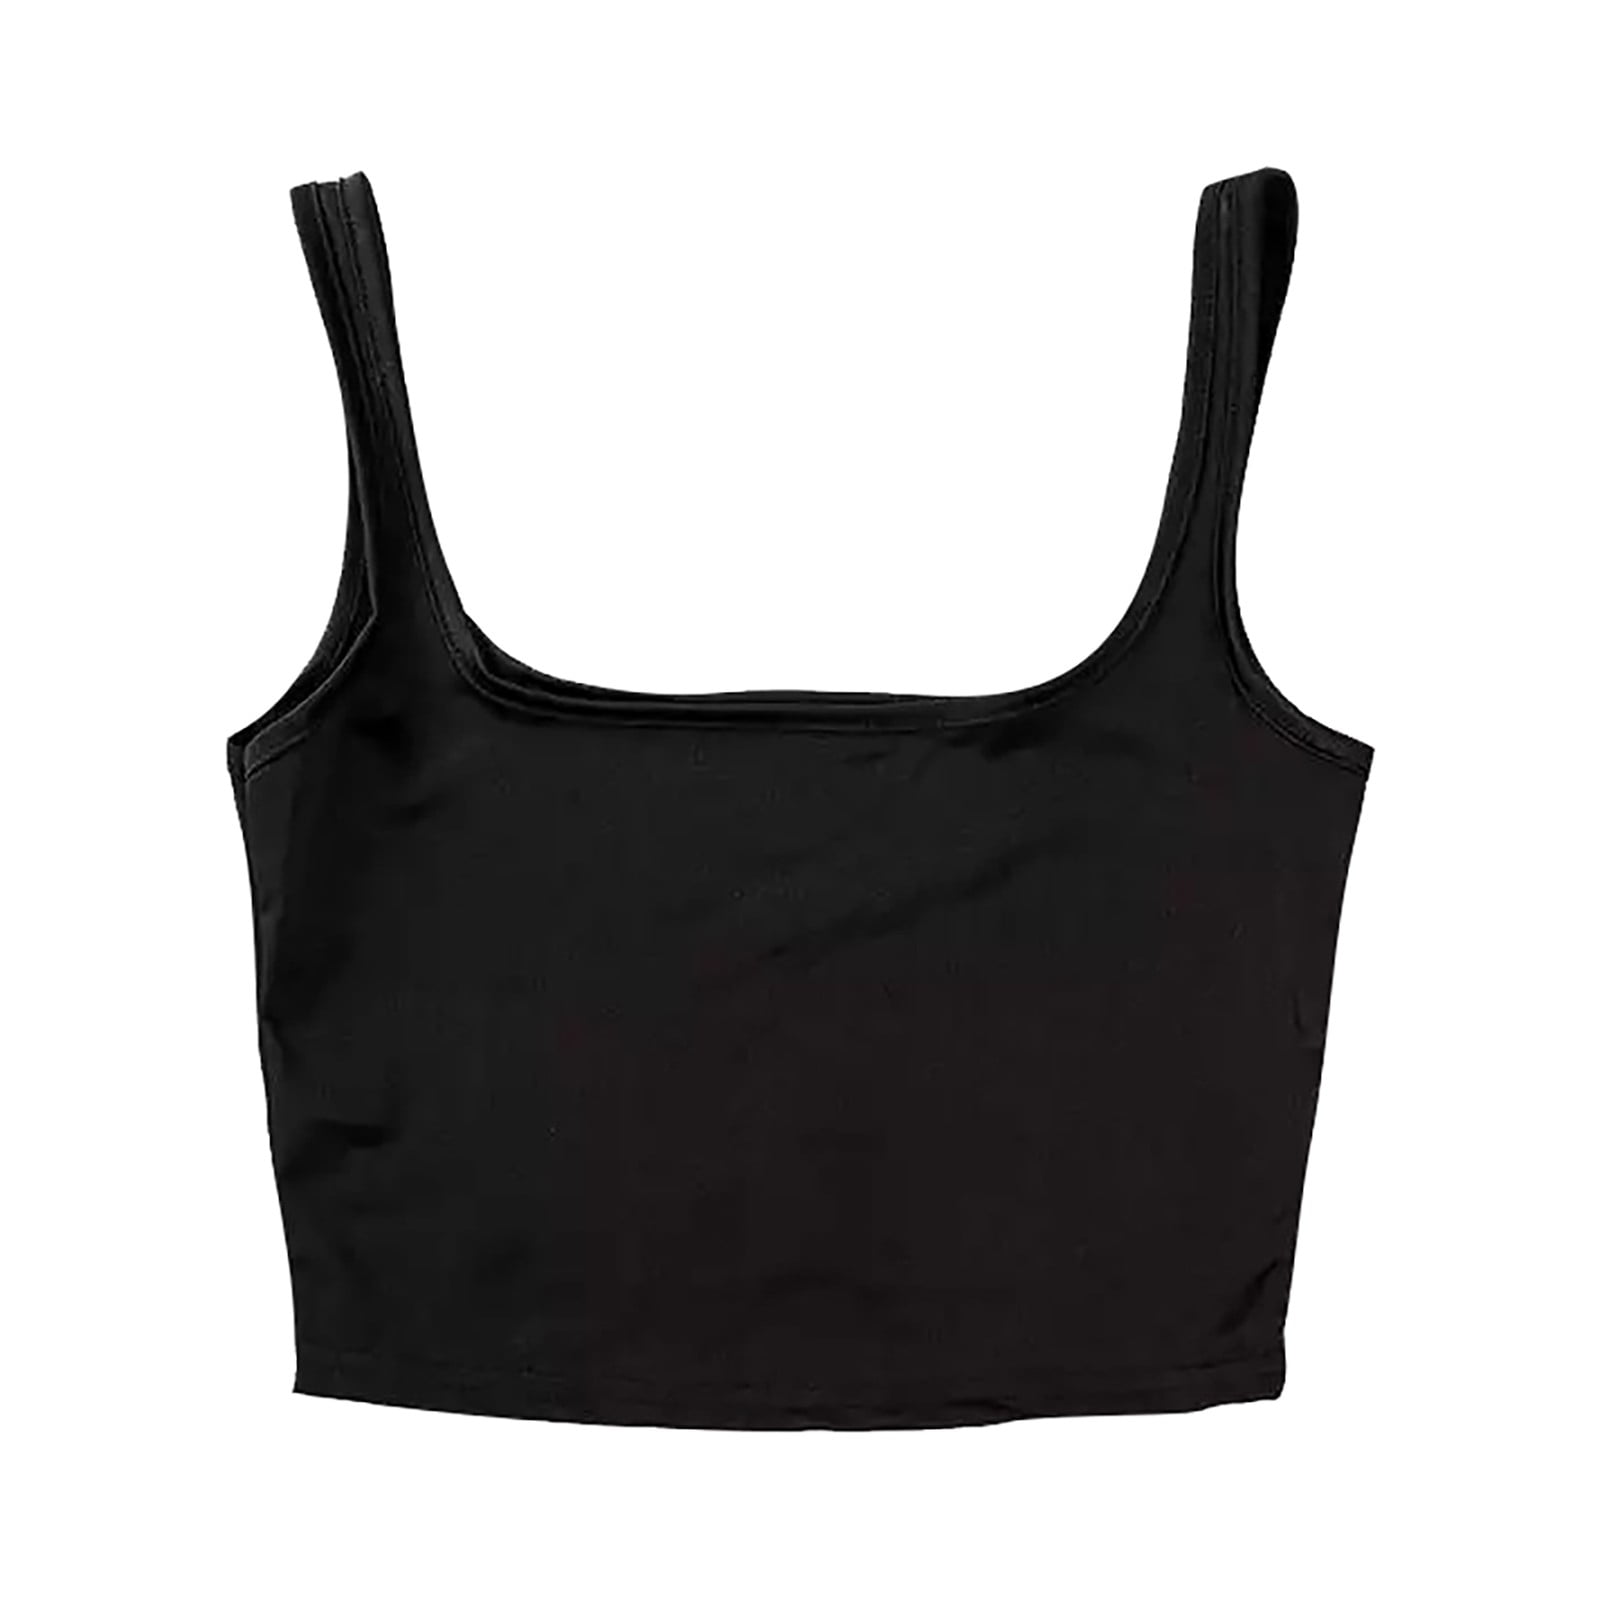 solacol Tank Tops for Women Fashion Women Sleeveless Casual Vest Ladies ...